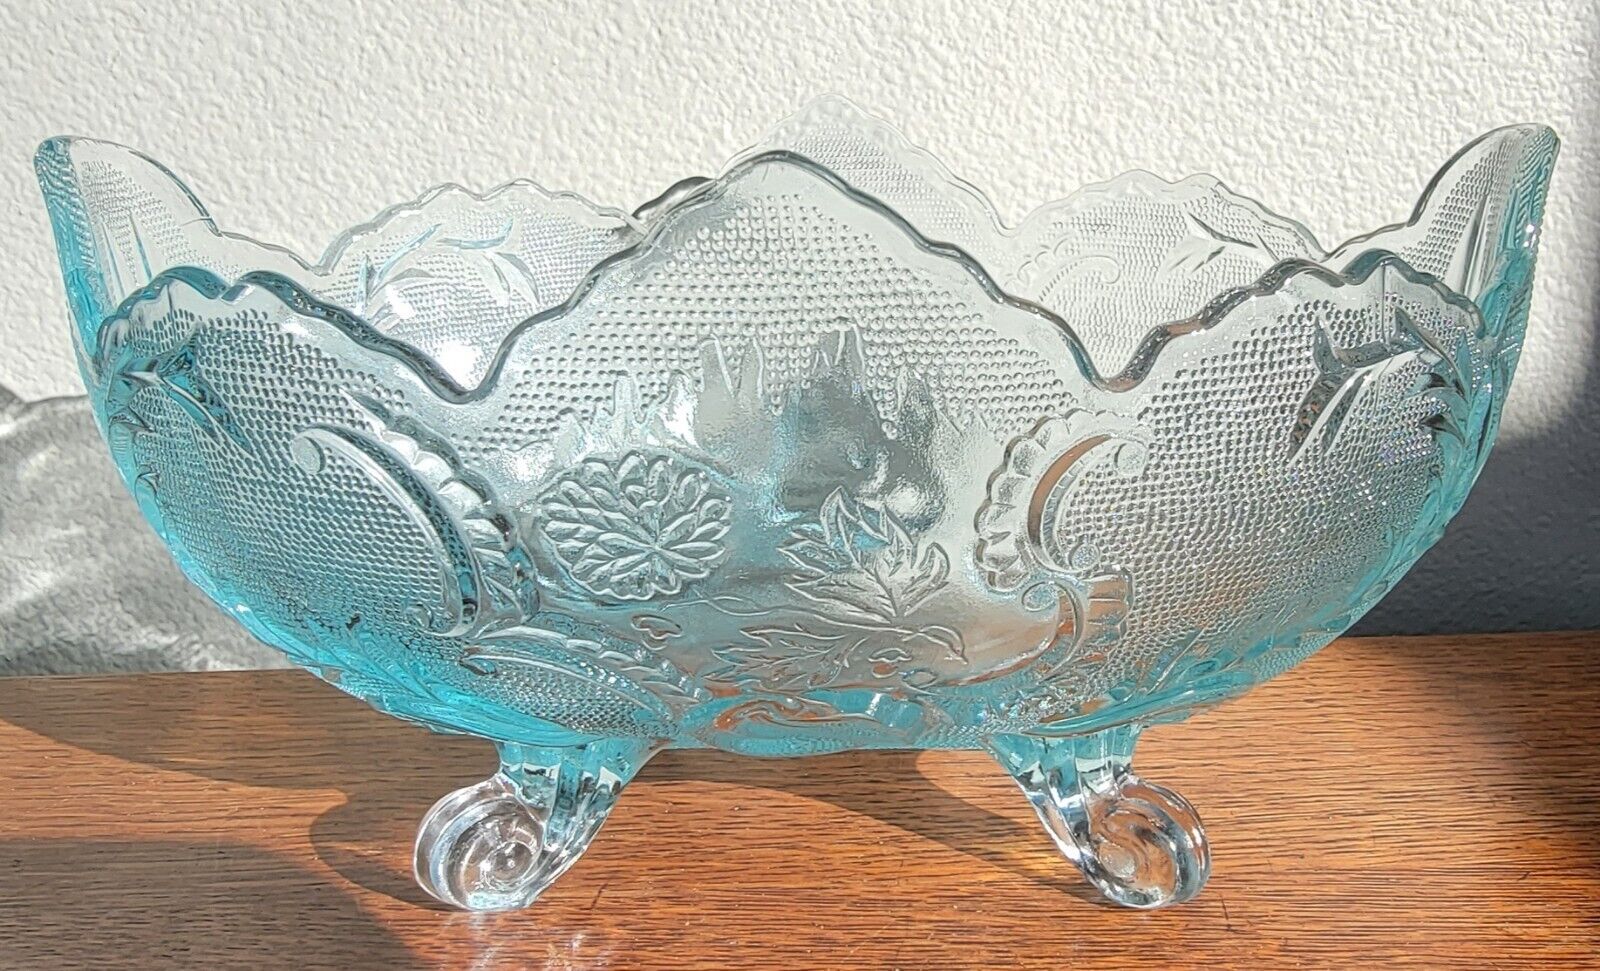 Fruit Bowl Footed Oval Starlight Ice Blue Jeannette Lombardi Glass Vintage